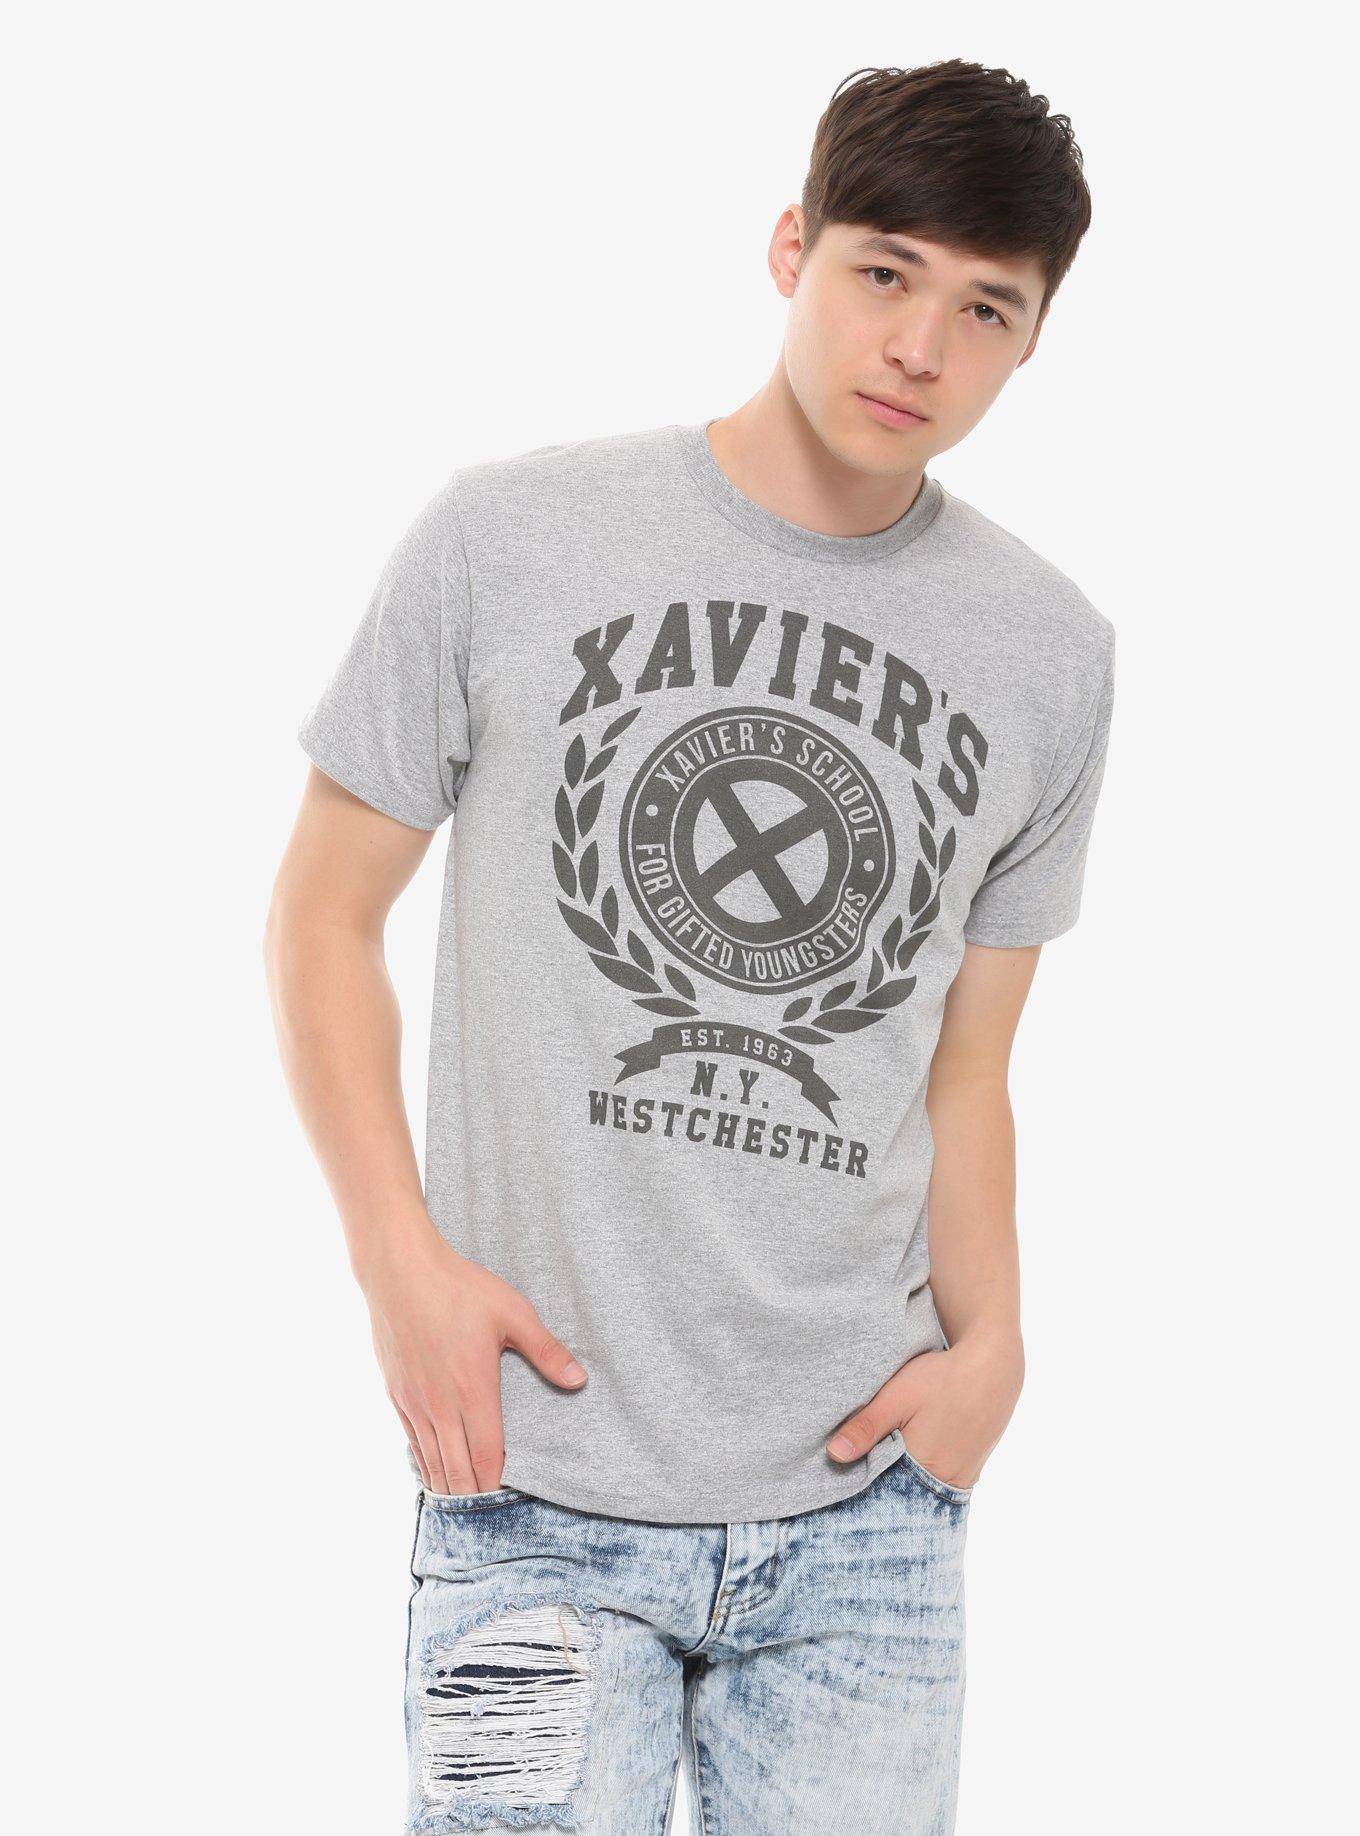 Marvel X-Men Xavier's School For Gifted Youngsters T-Shirt, BLACK, alternate